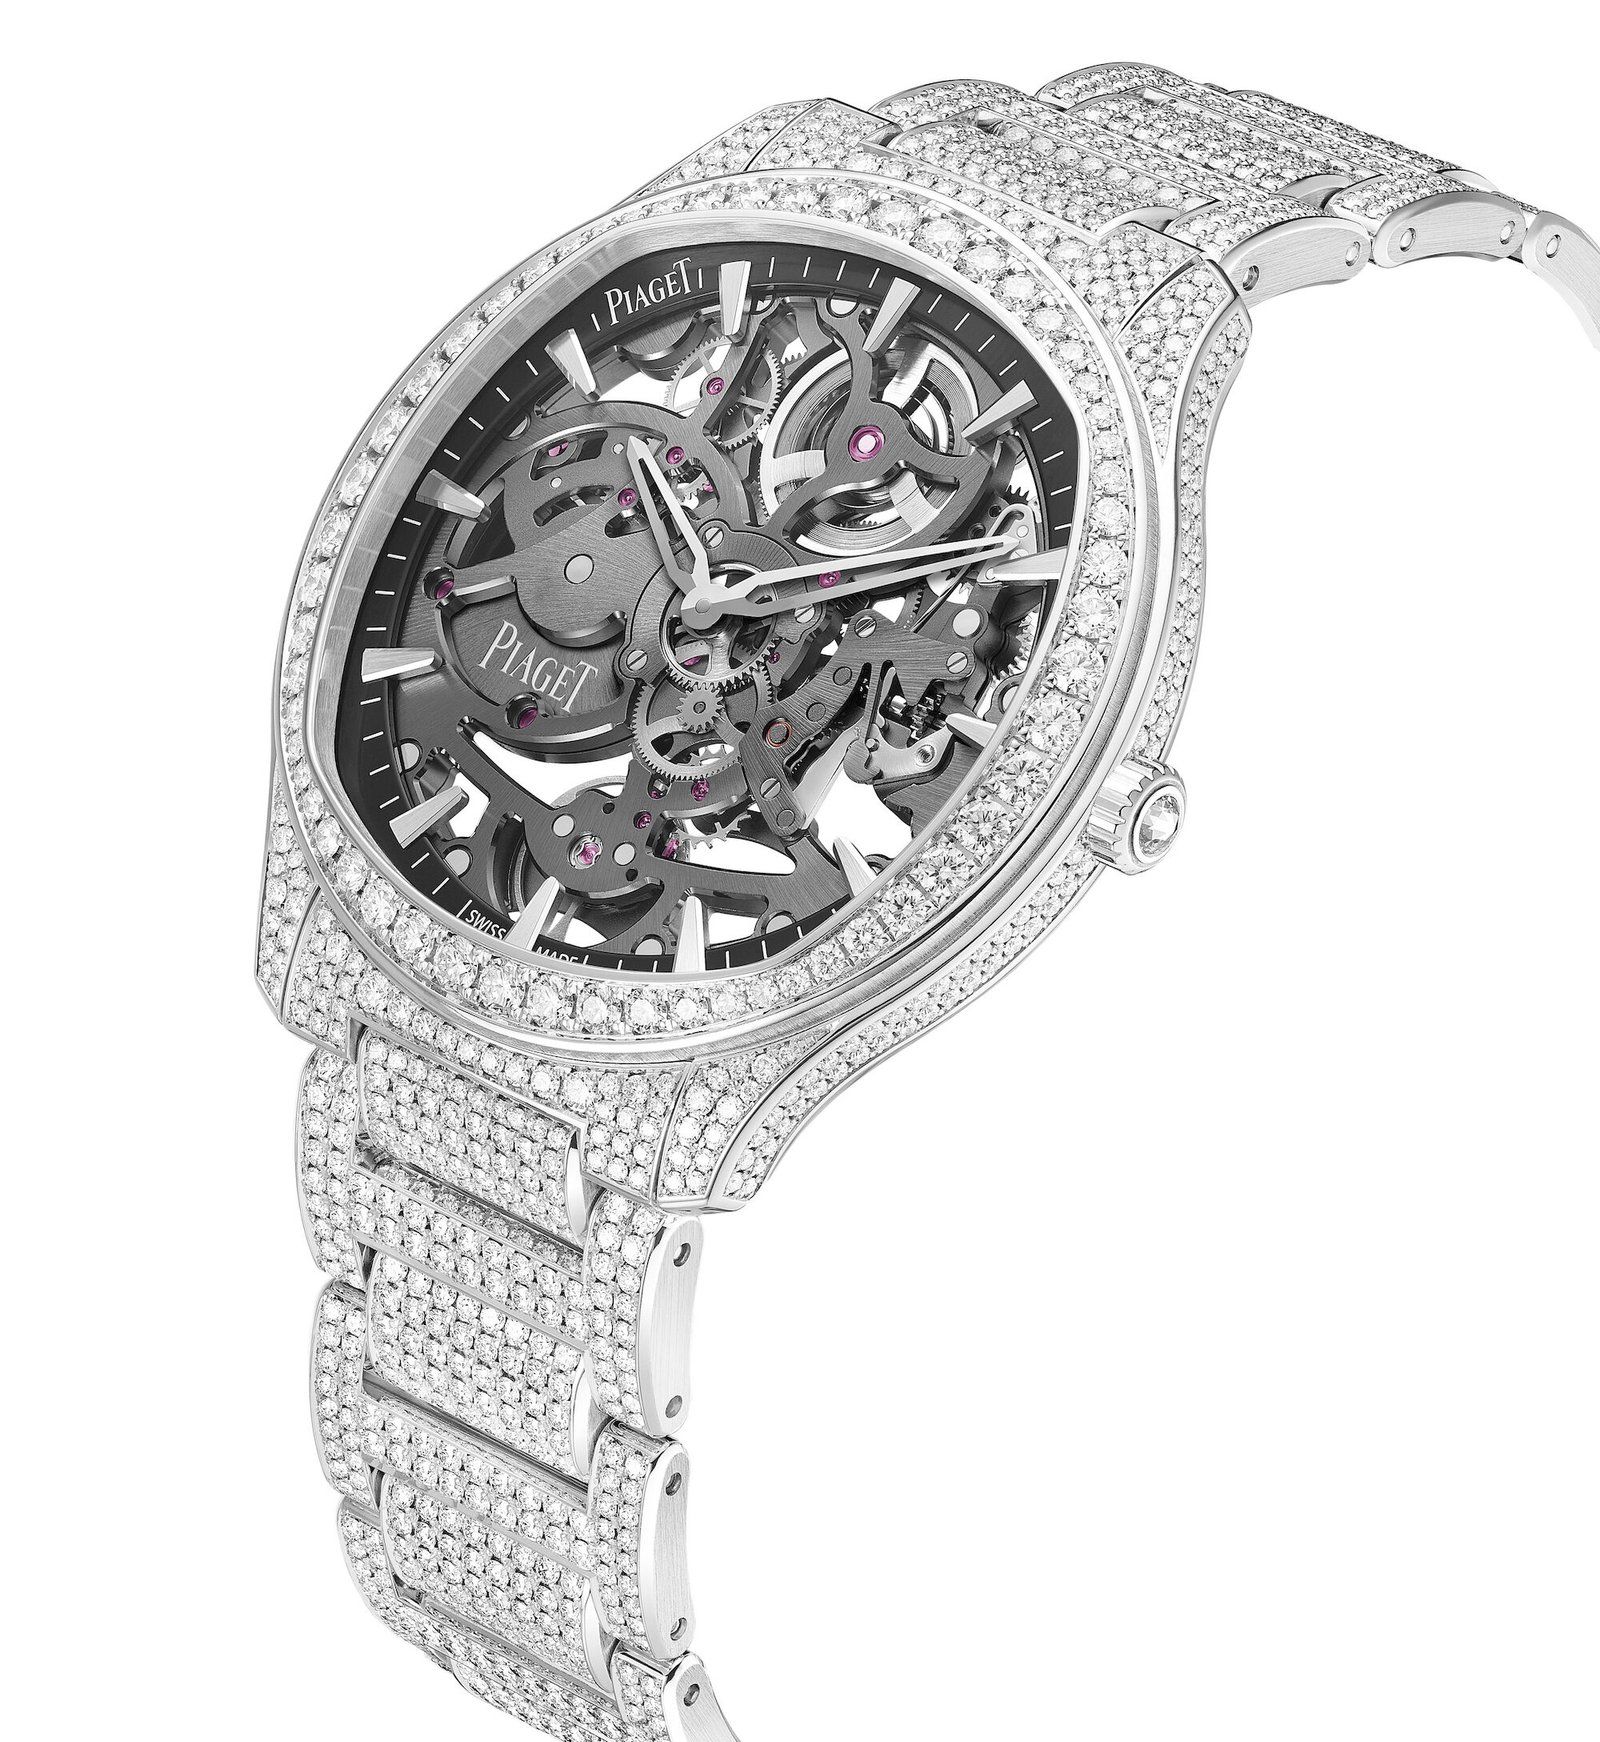 Piaget Polo Skeleton With Wafer-Thin Mechanics